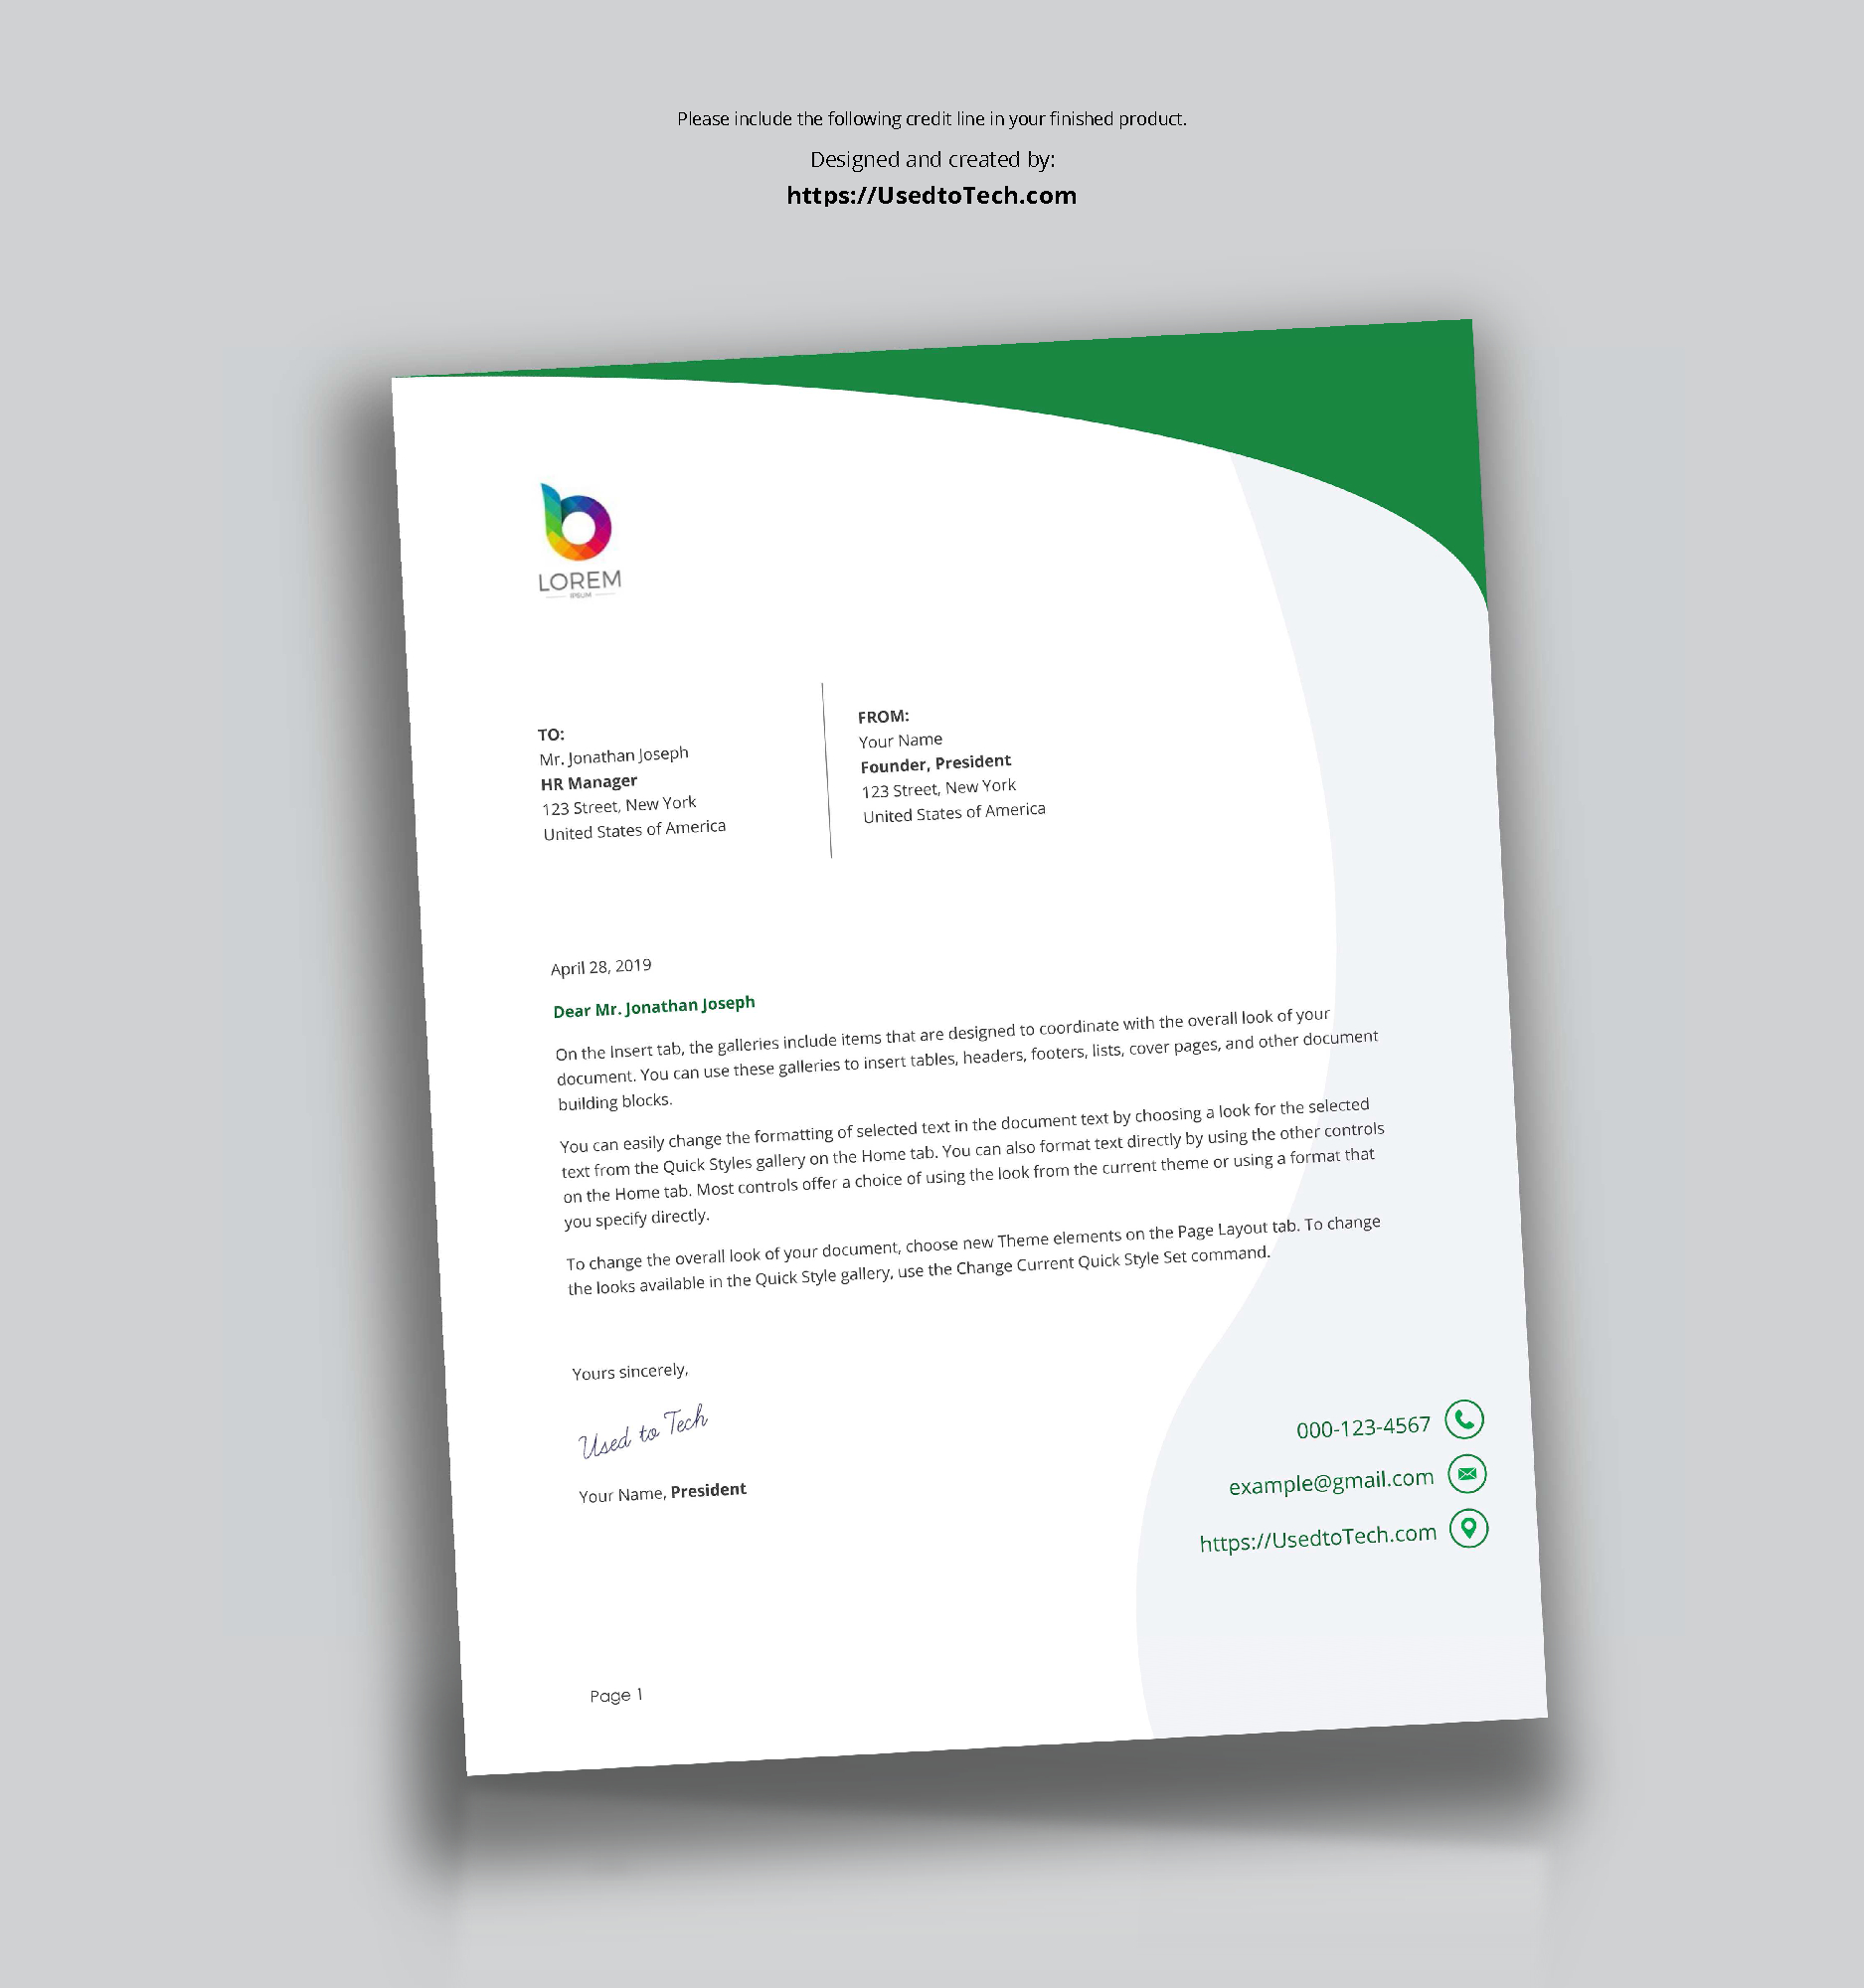 Perfect Letterhead Design In Word Free - Used To Tech In Free Letterhead Templates For Microsoft Word